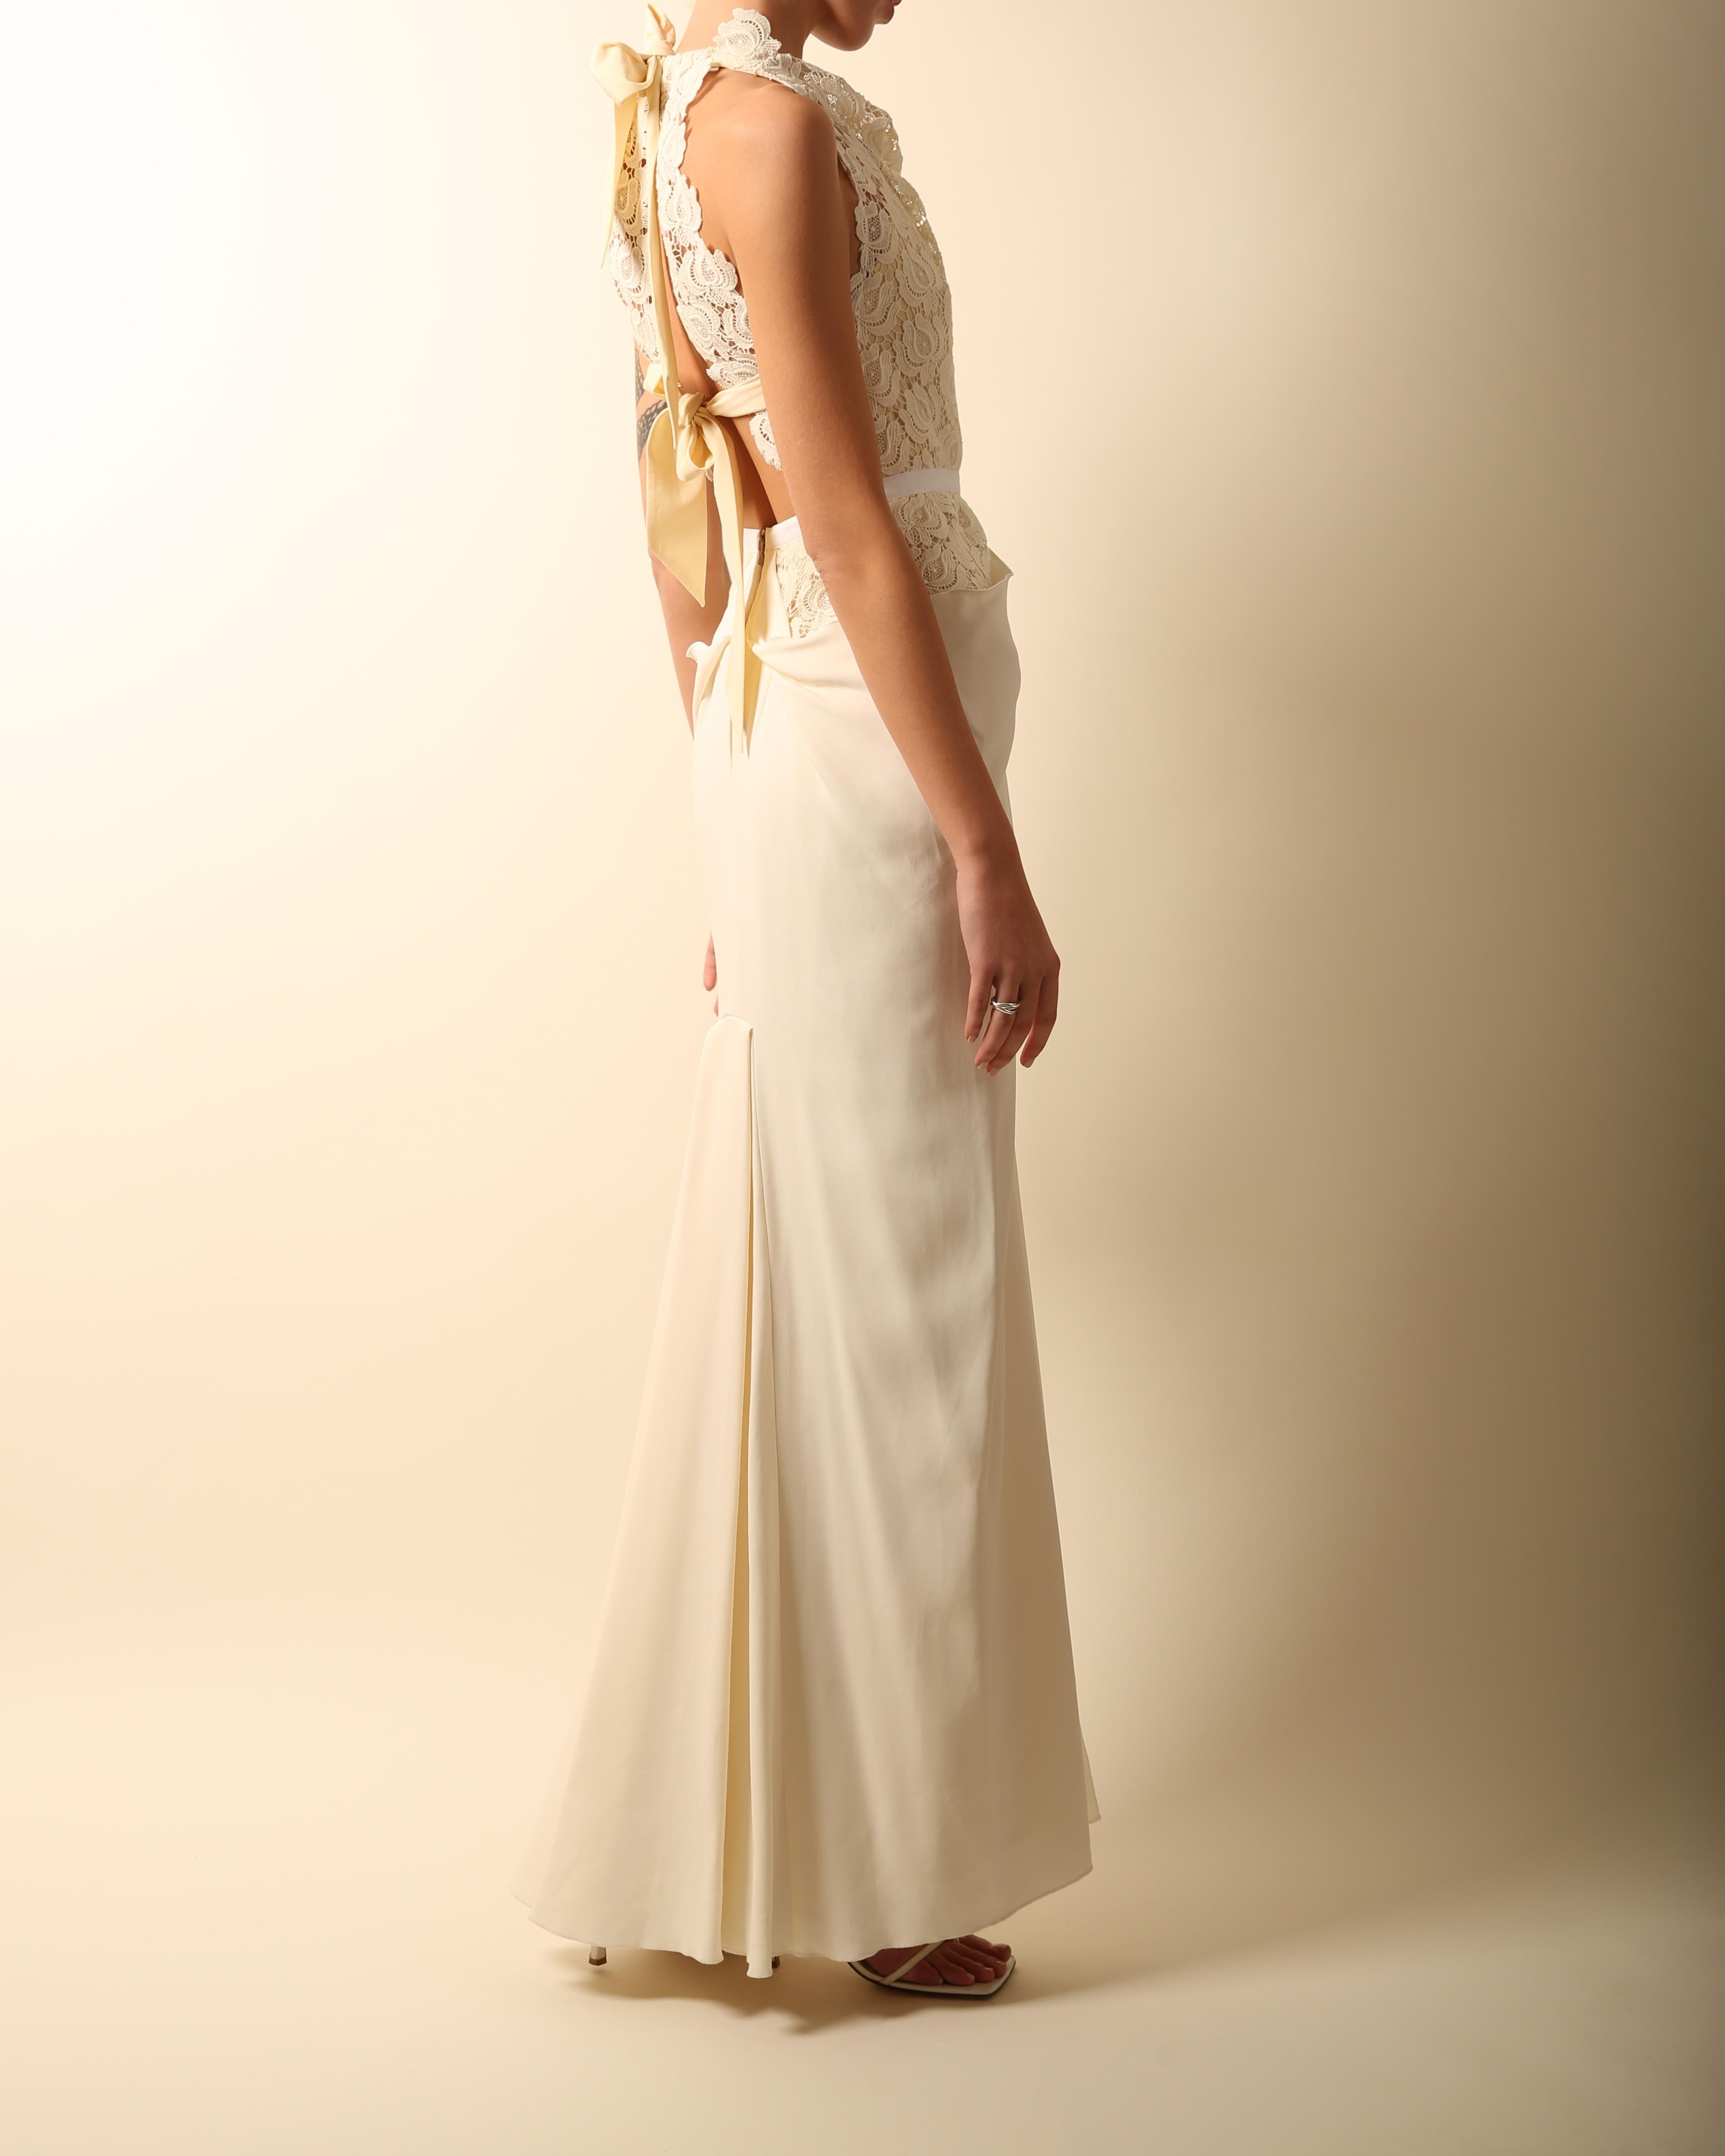 Beige Roland Mouret ivory cream lace halter ribbon tie cut out backless wedding dress